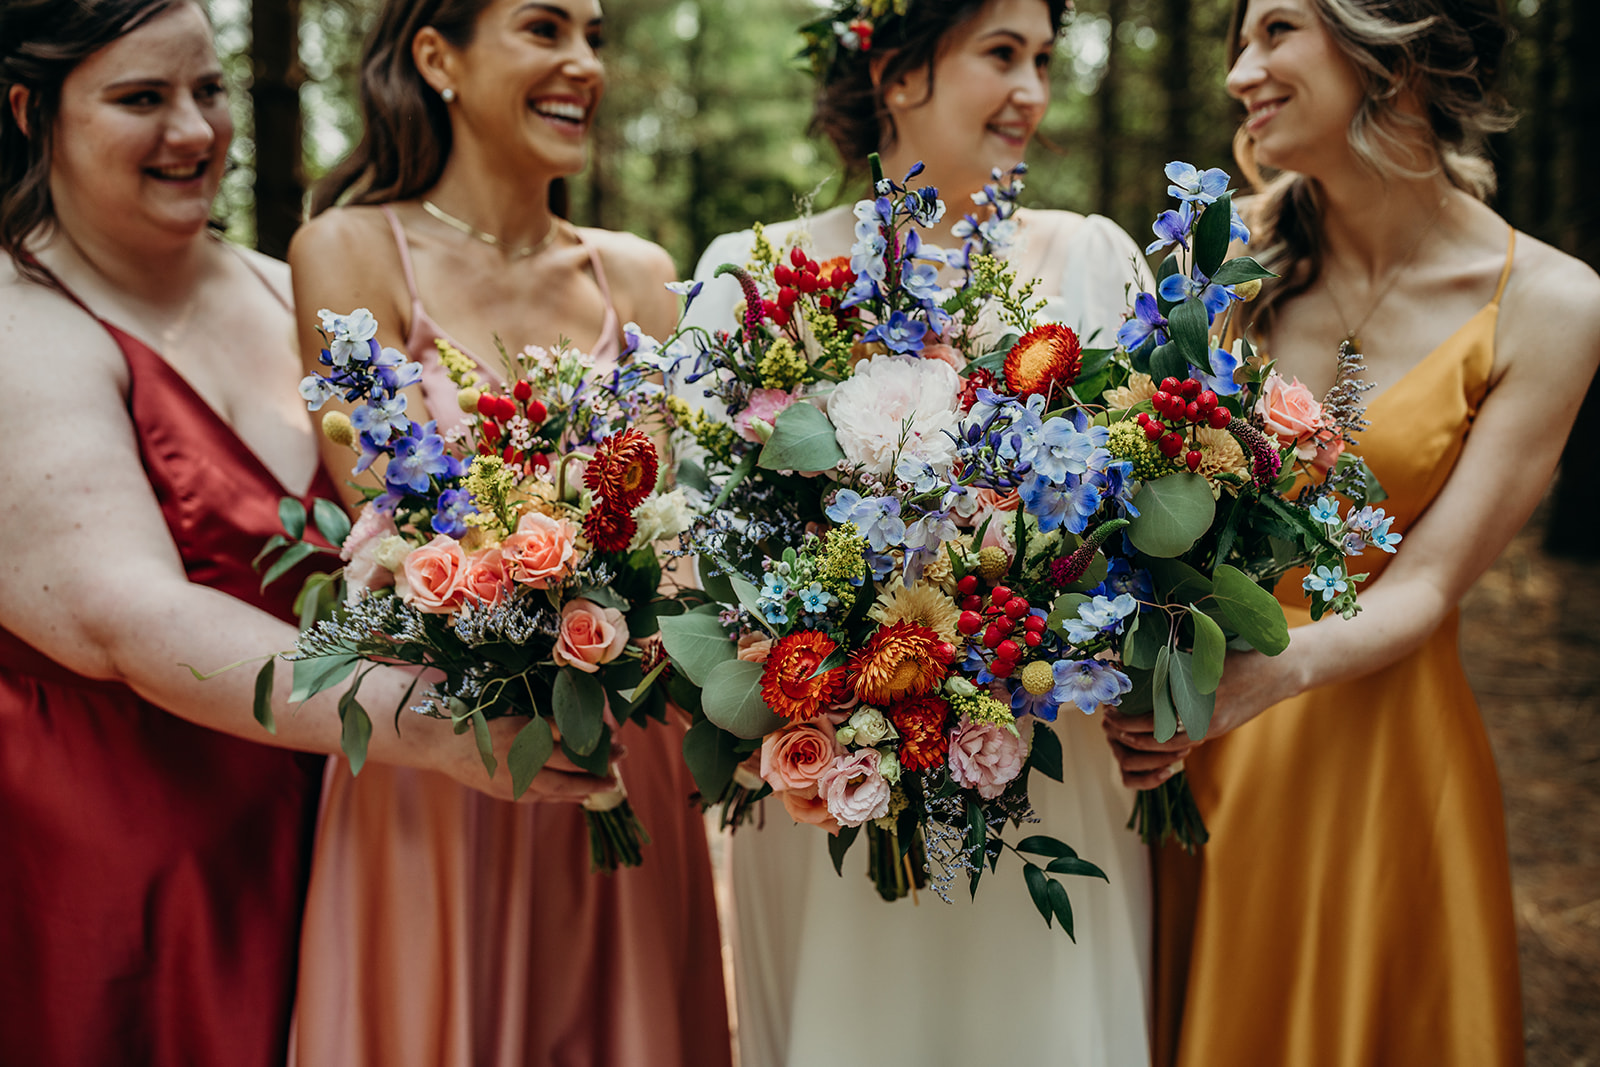 The gorgeous flowers should be the inspiration for many bridal bouquets to come